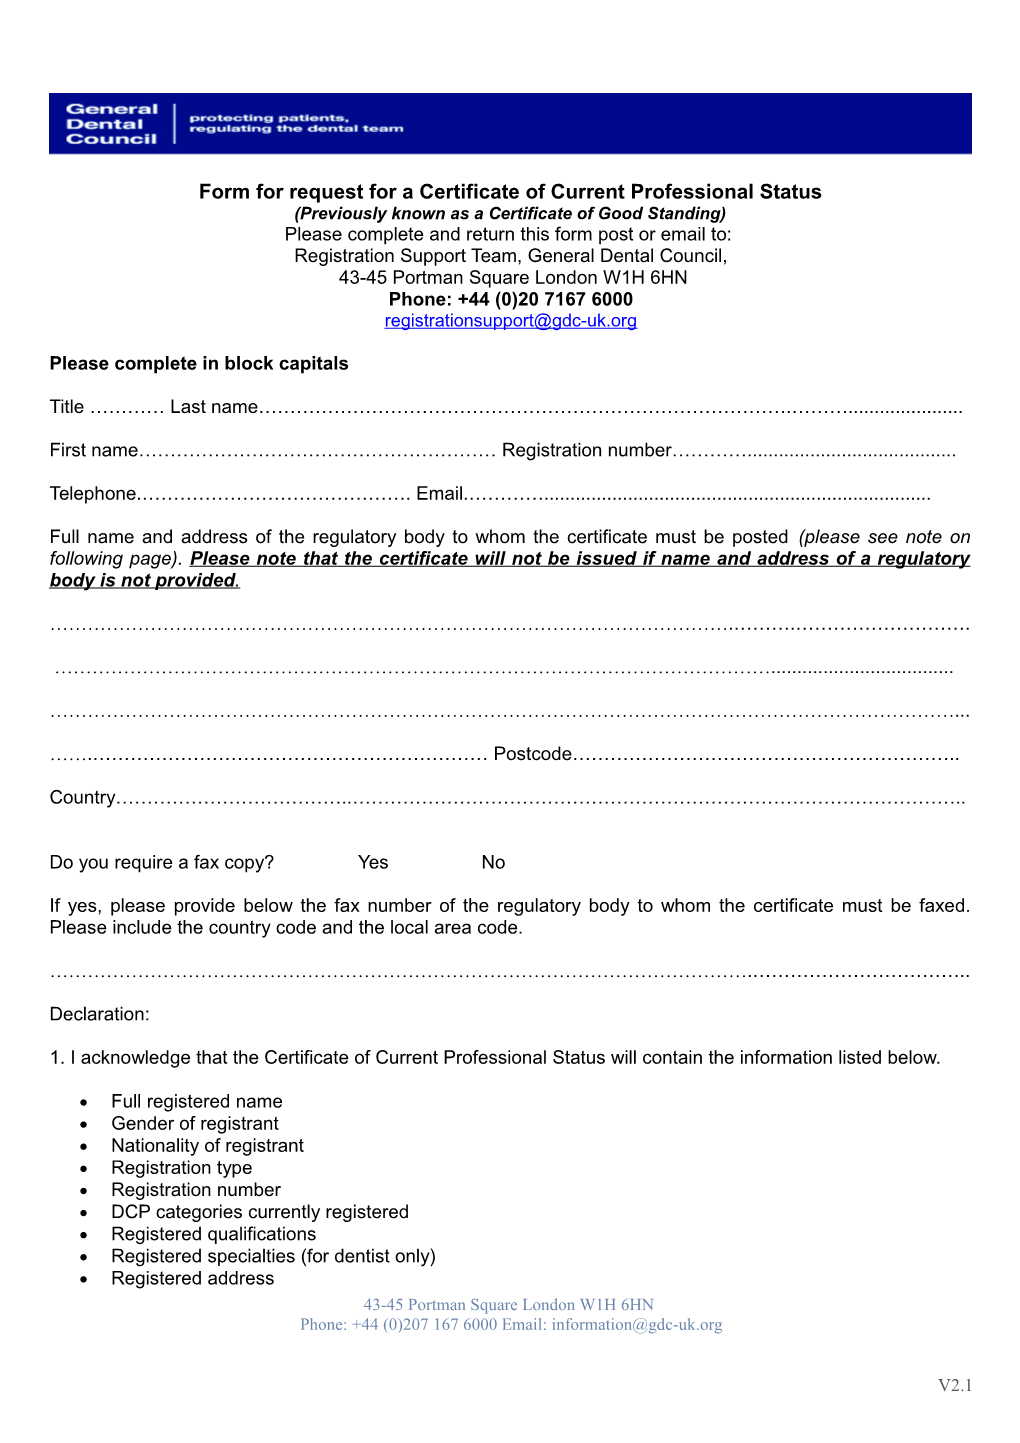 Form for Request for a Certificate of Current Professional Status